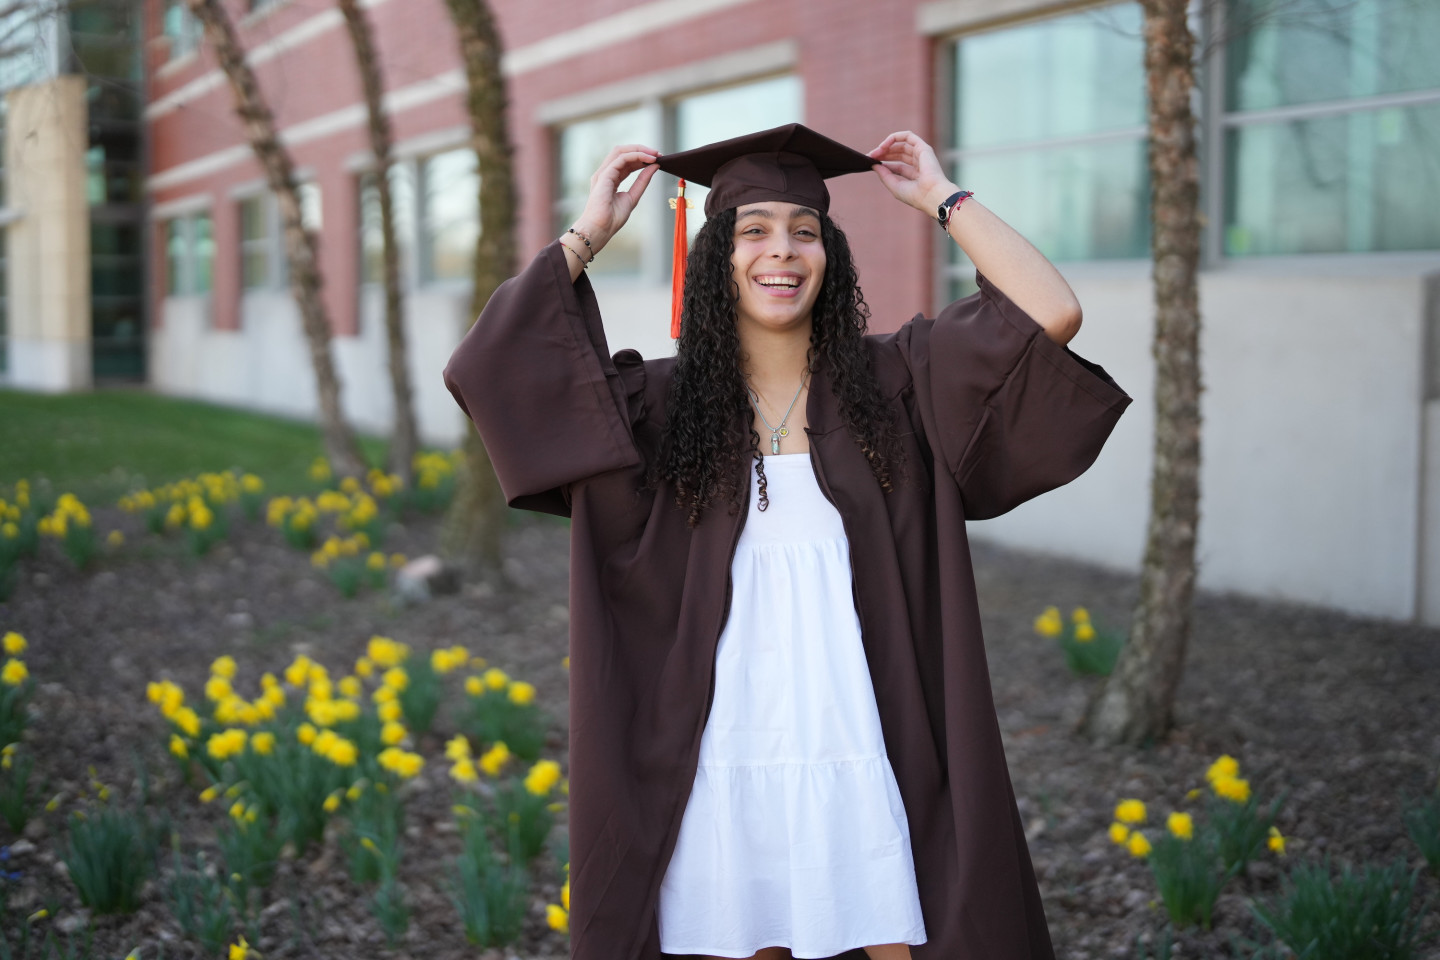 Zahi Sanchez poses outside in a graduation cap and gown with yellow flowers in the background.